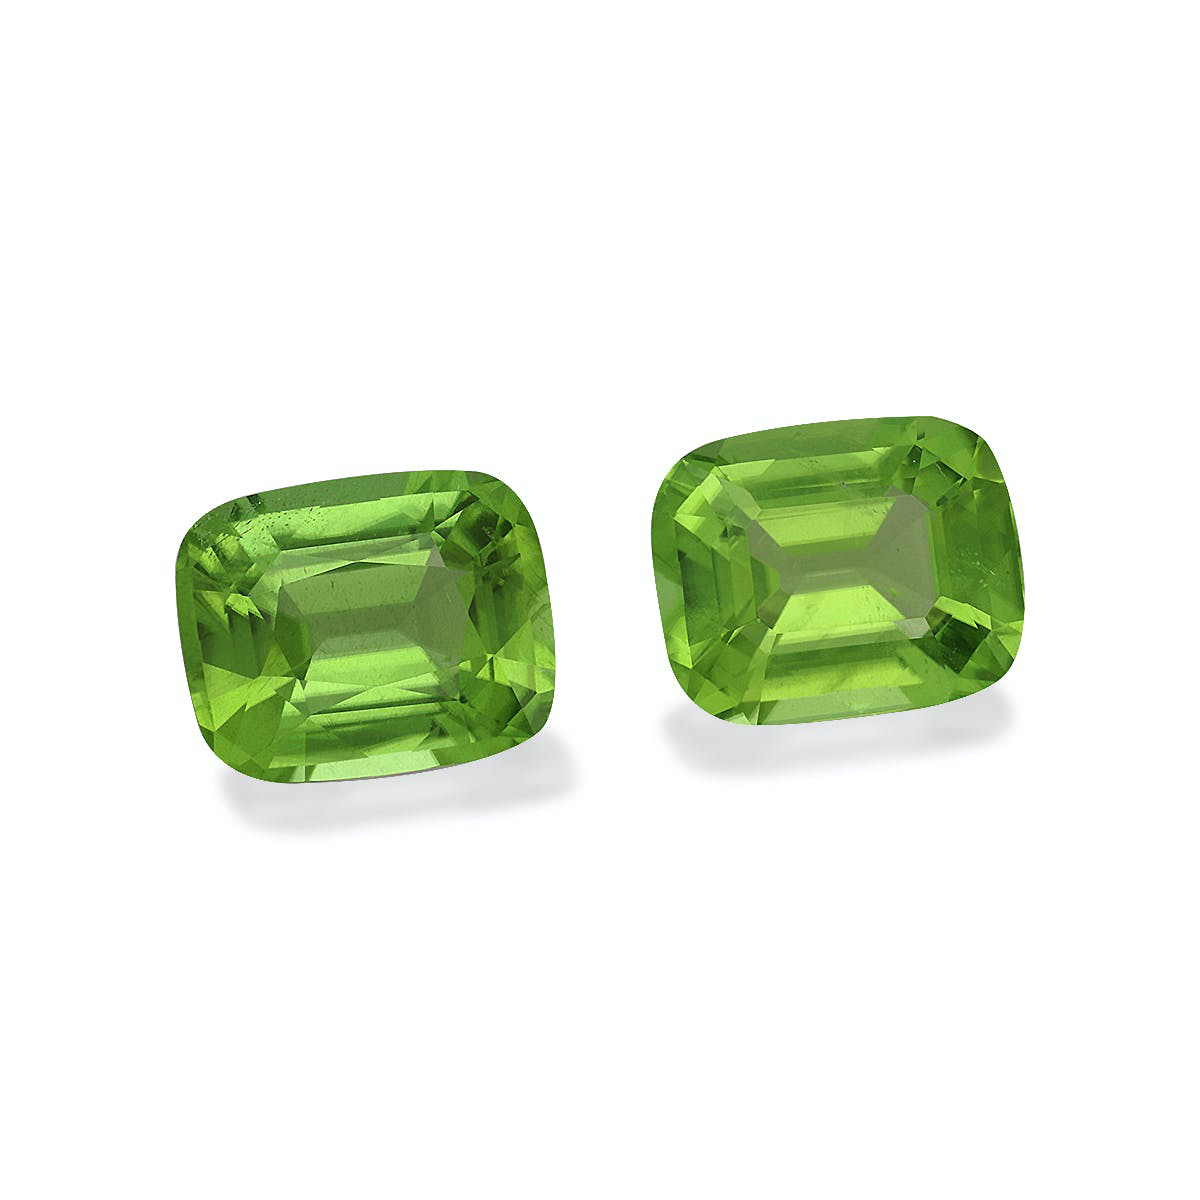 Picture of Pistachio Green Peridot 6.71ct - 10x8mm Pair (PD0157)